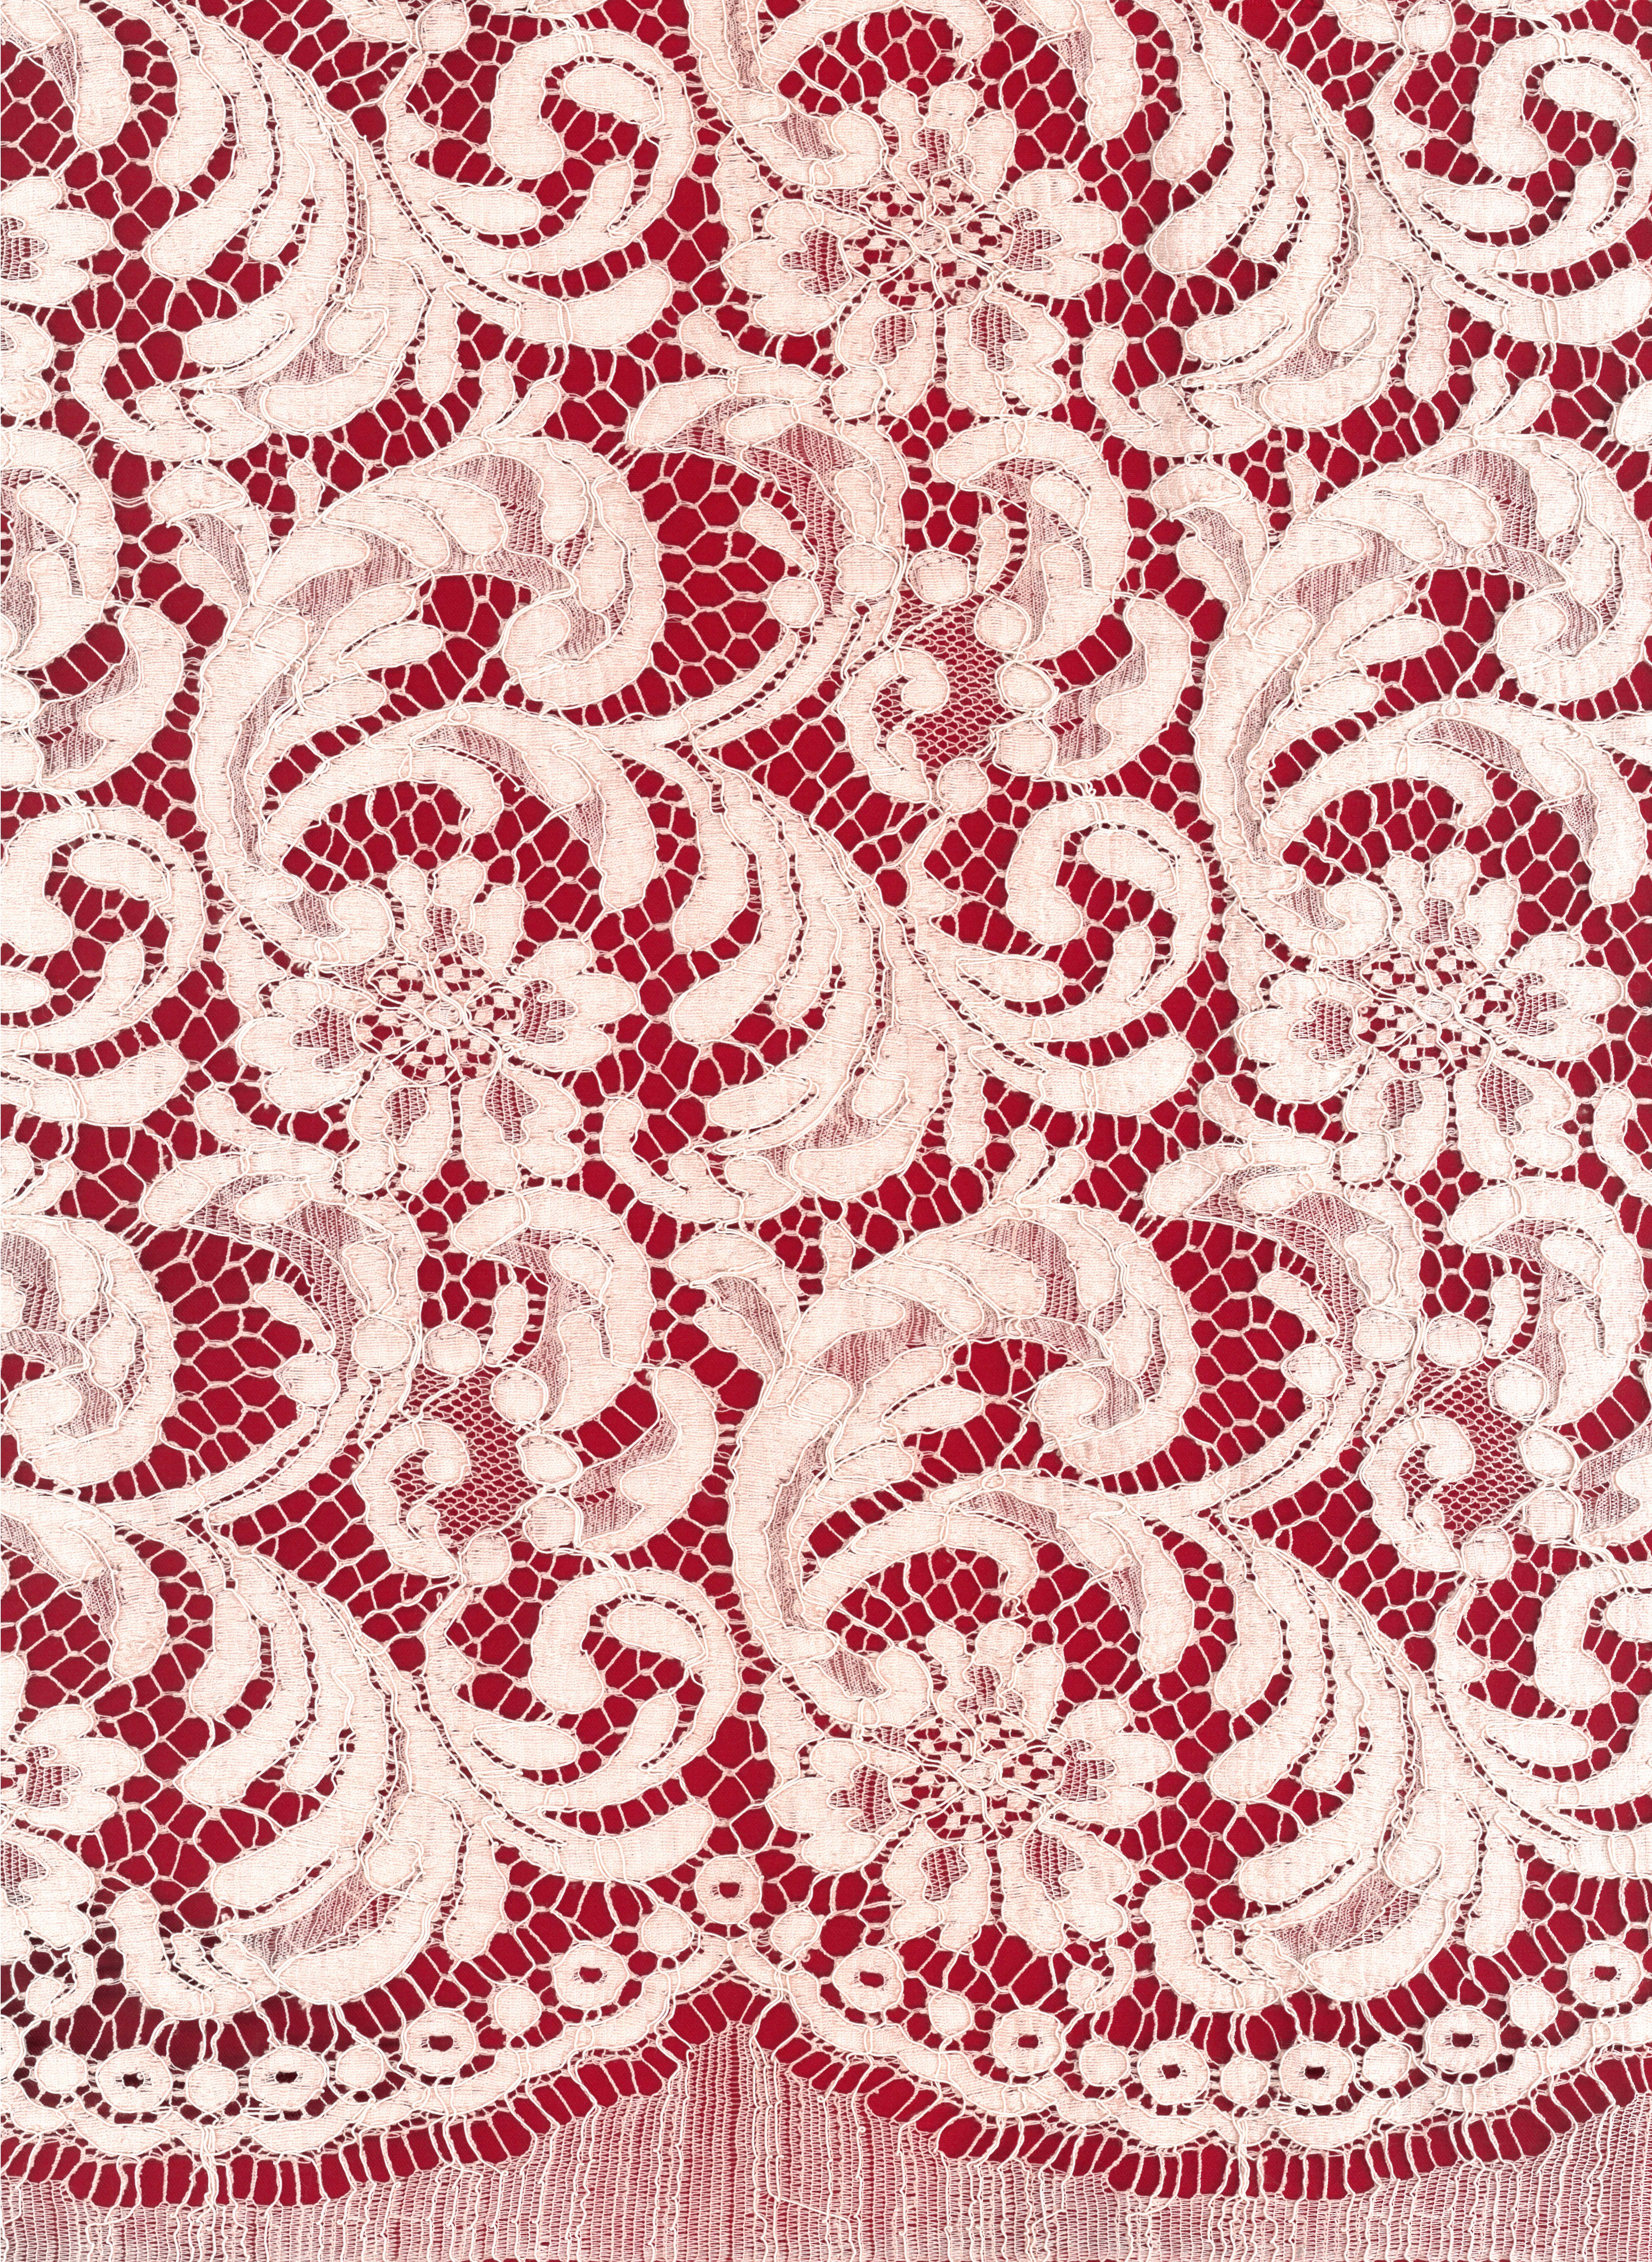 CORDED FRENCH LACE - ROSE COUTURE